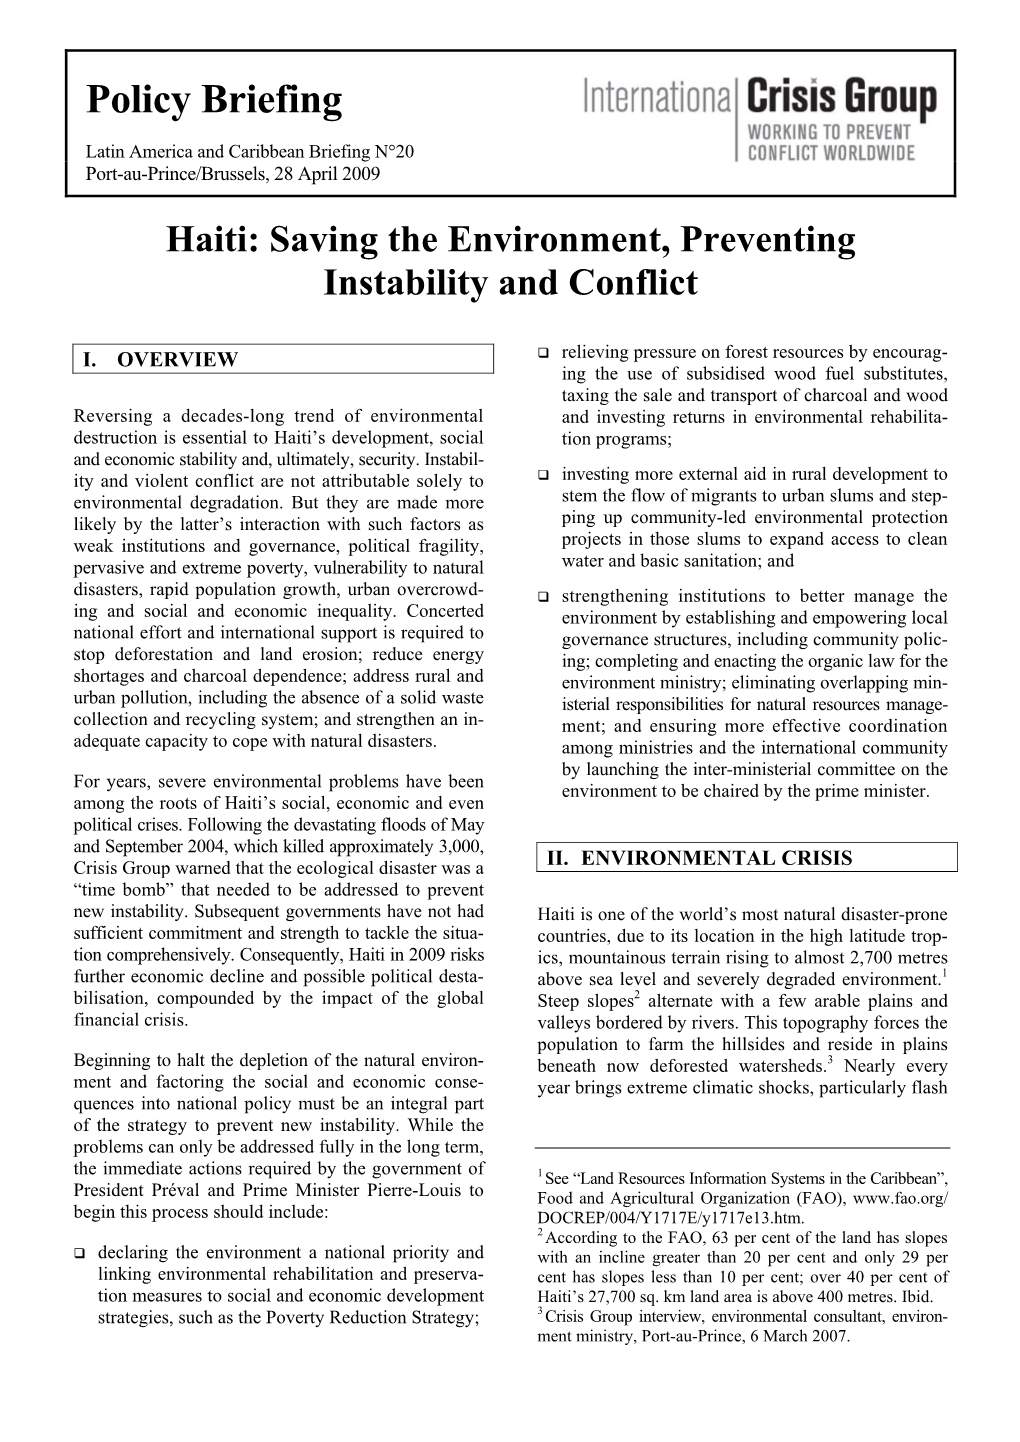 Haiti: Saving the Environment, Preventing Instability and Conflict